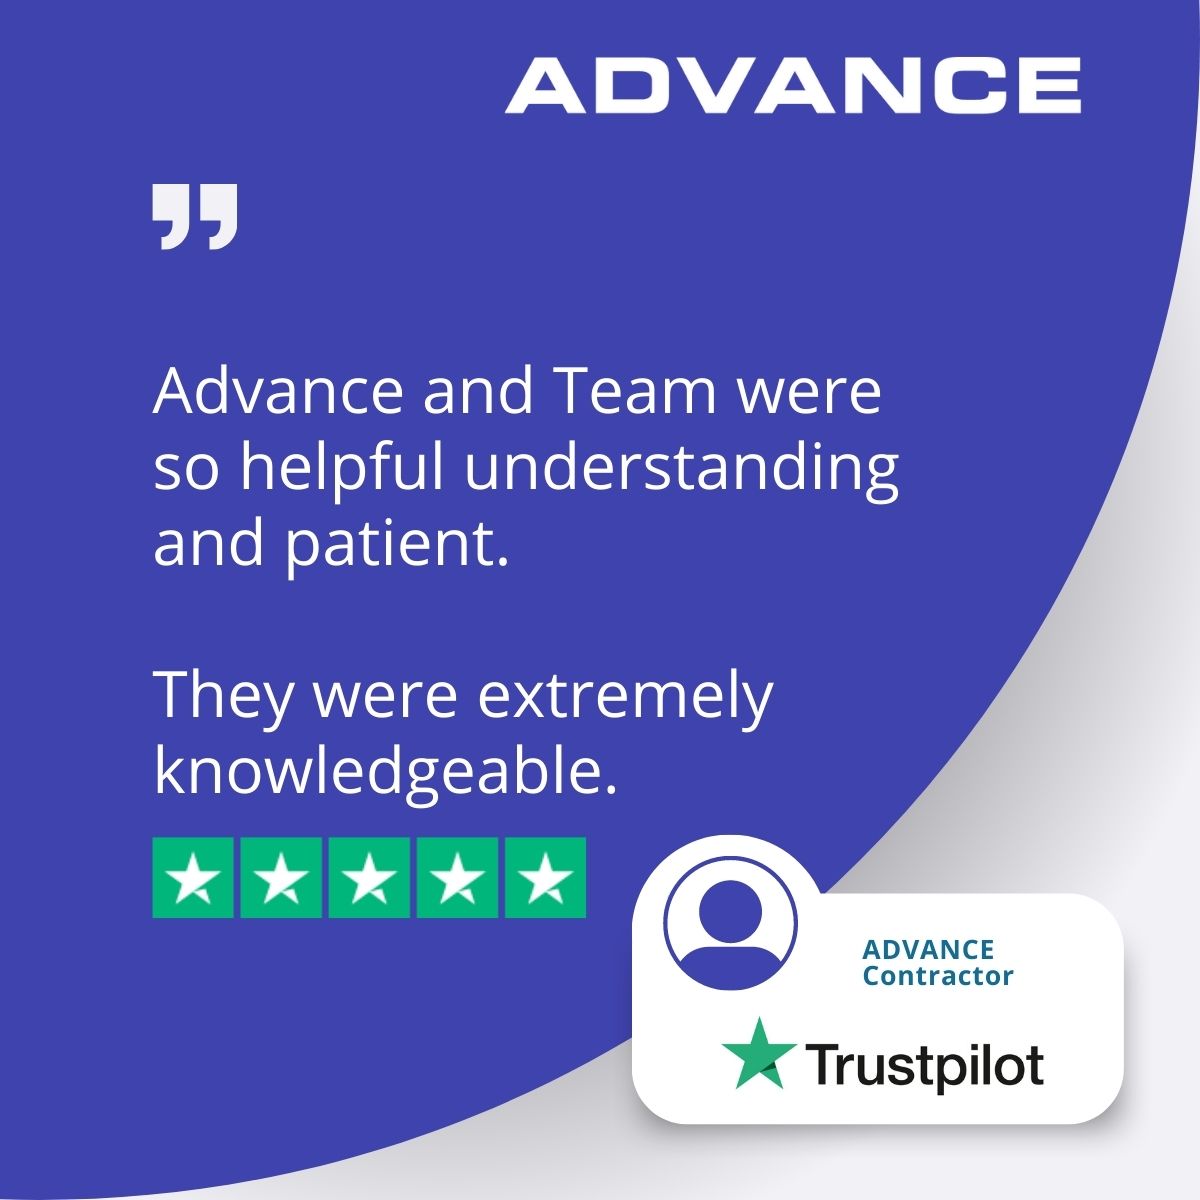 As you know, at ADVANCE we strive to answer all calls within #3rings, provide #expertsupport on every call, and #worldclassservice in all that we do. We are delighted to share another fantastic #5star review by another of our happy #contractors

#umbrella #cis #limitedcompany